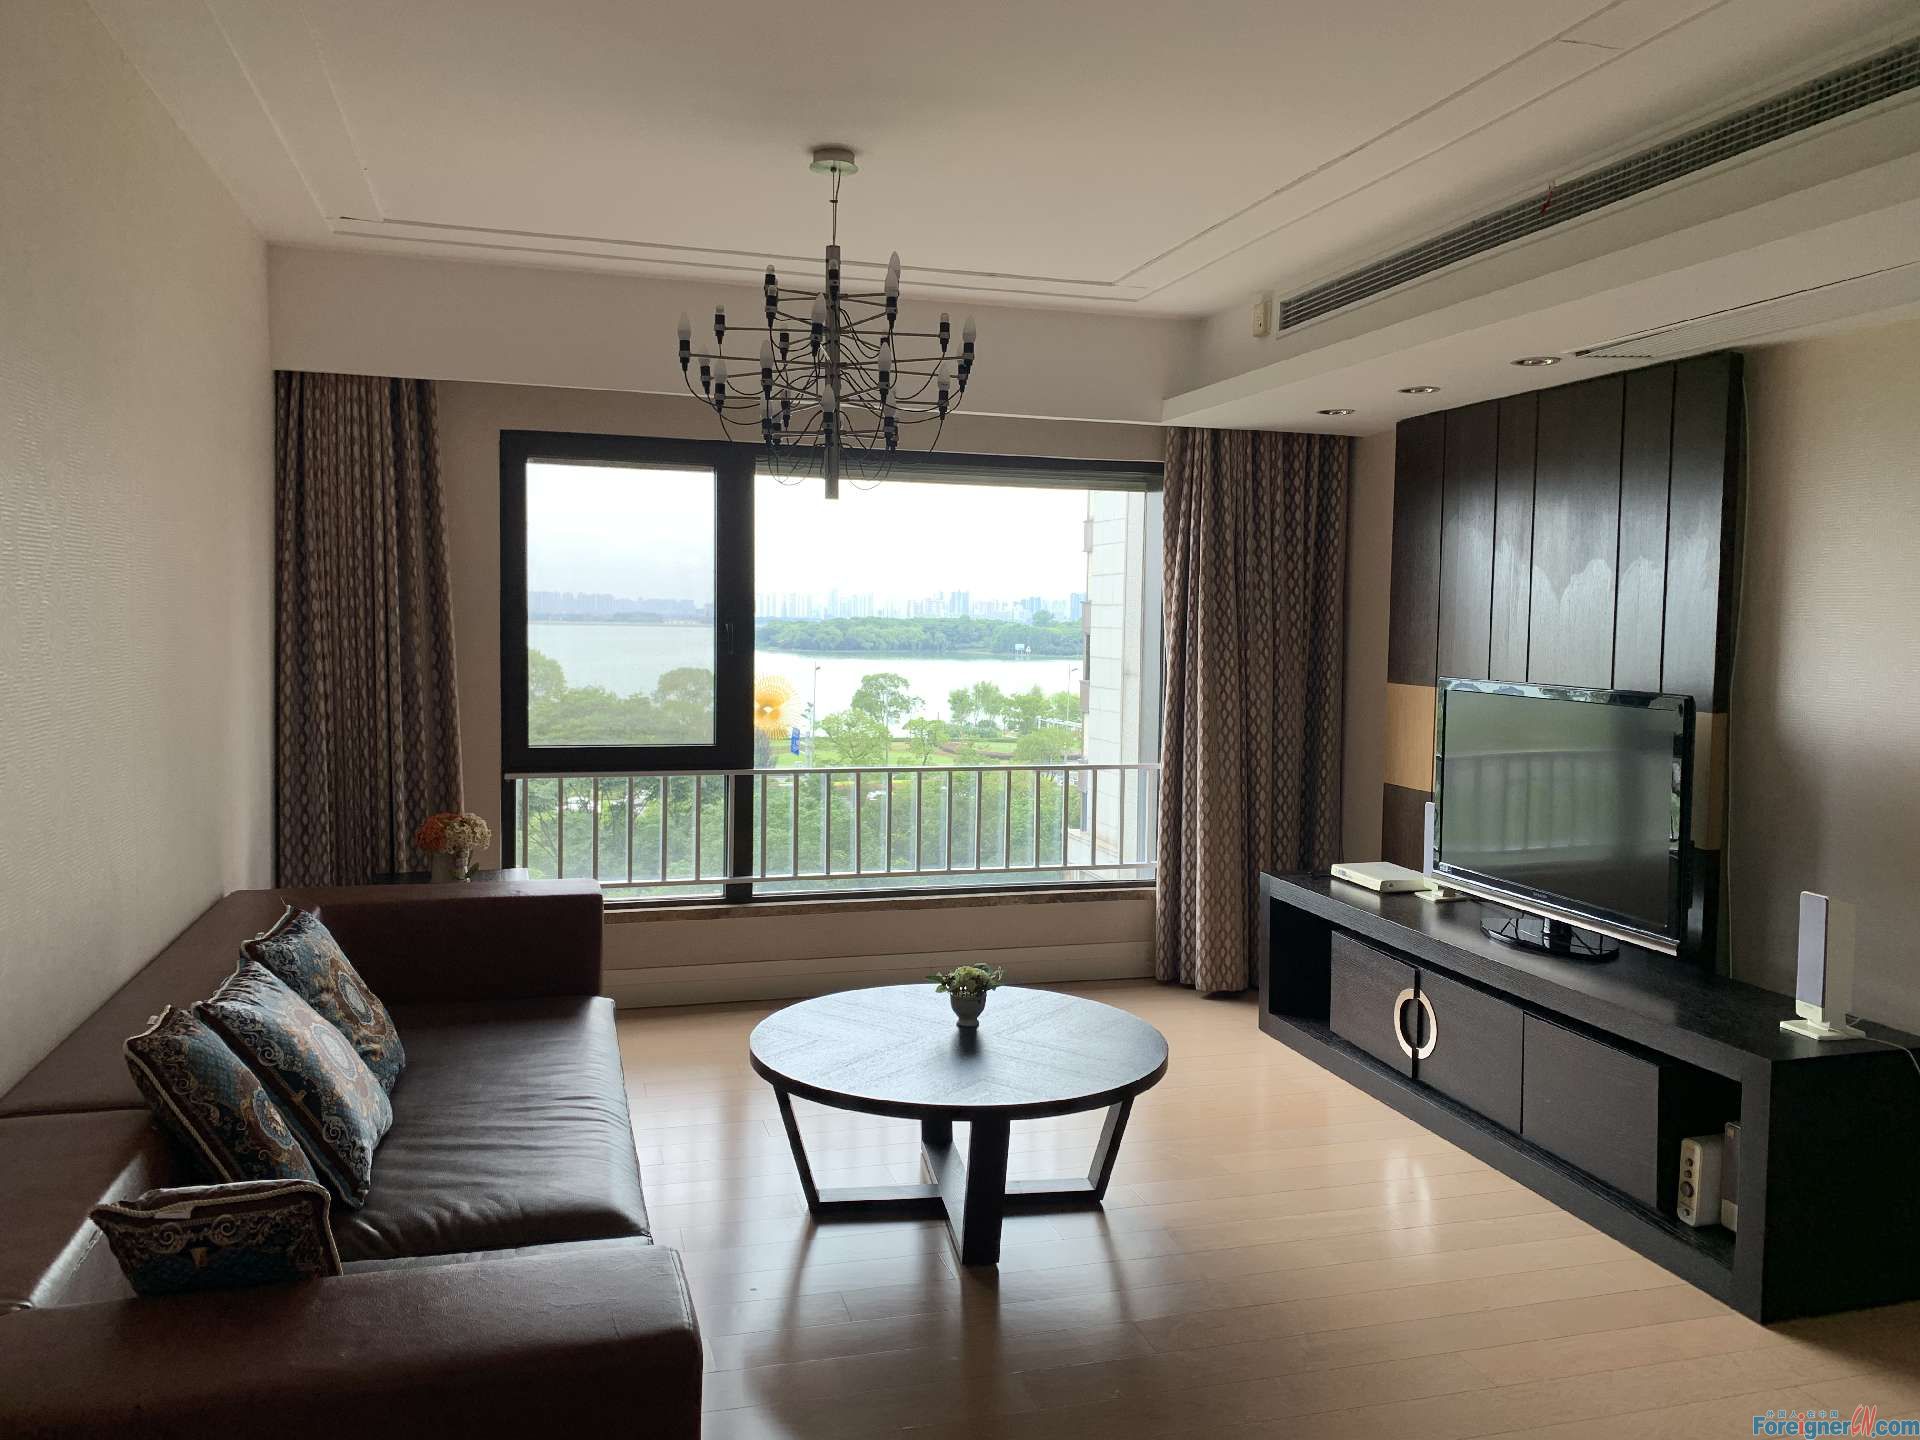 ​Amazing !! great apartment rent in Suzhou /1 bedroom and 1 bathroom/cozy room and modern design/amazing lake view /Jinji lake/Moon Habor/ 